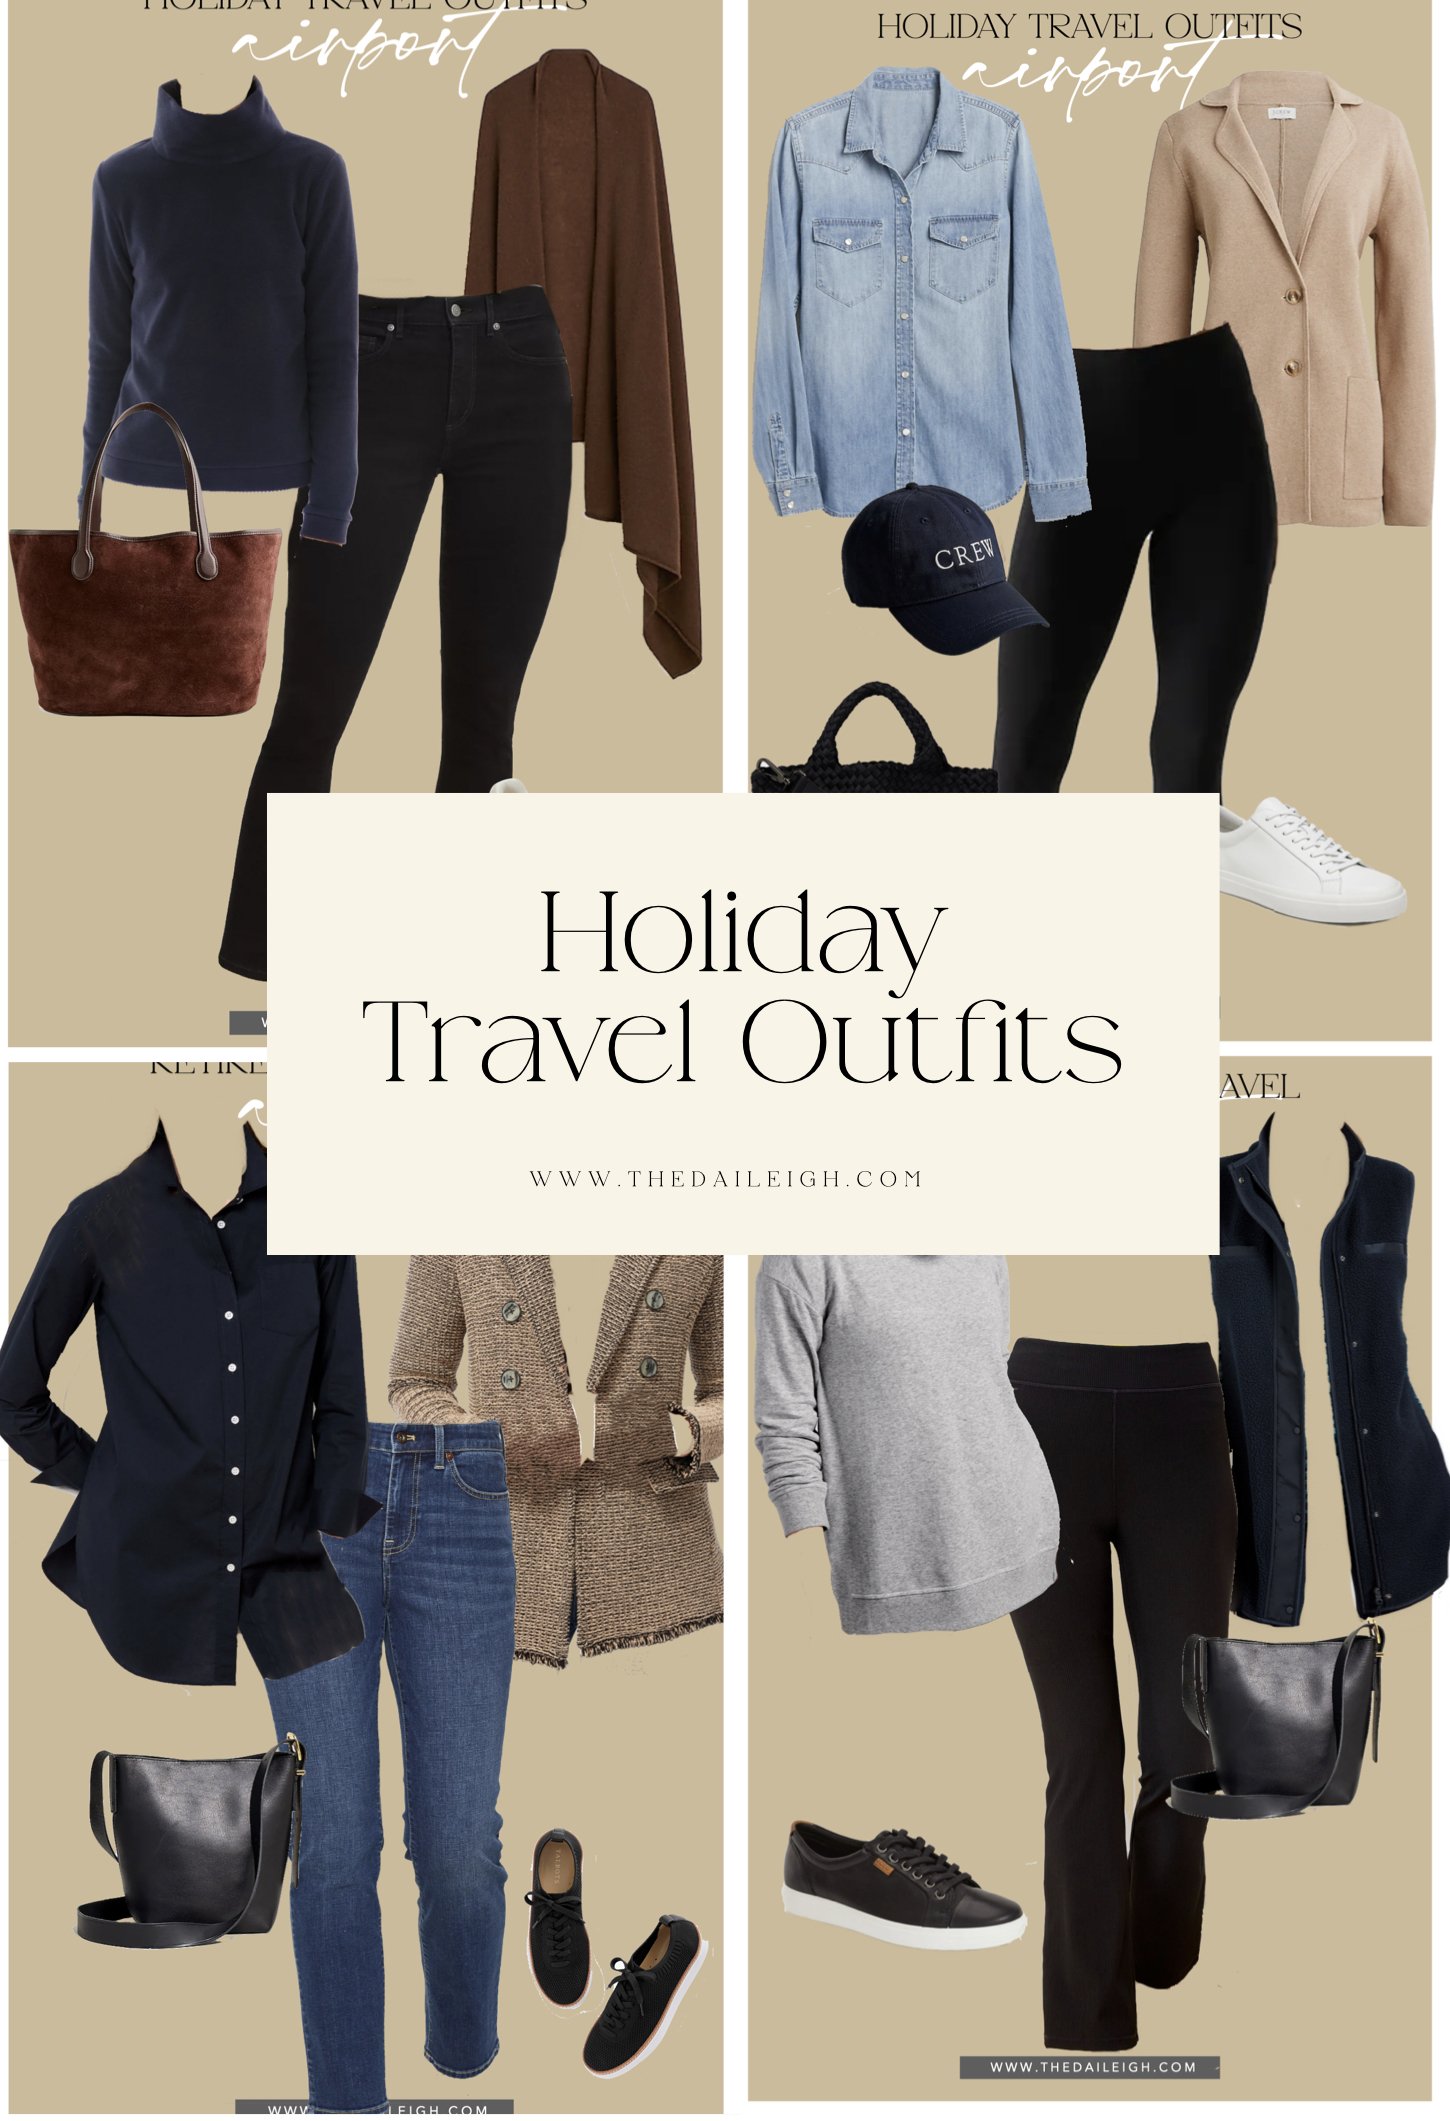 Holiday Travel Outfits — THE DAILEIGH